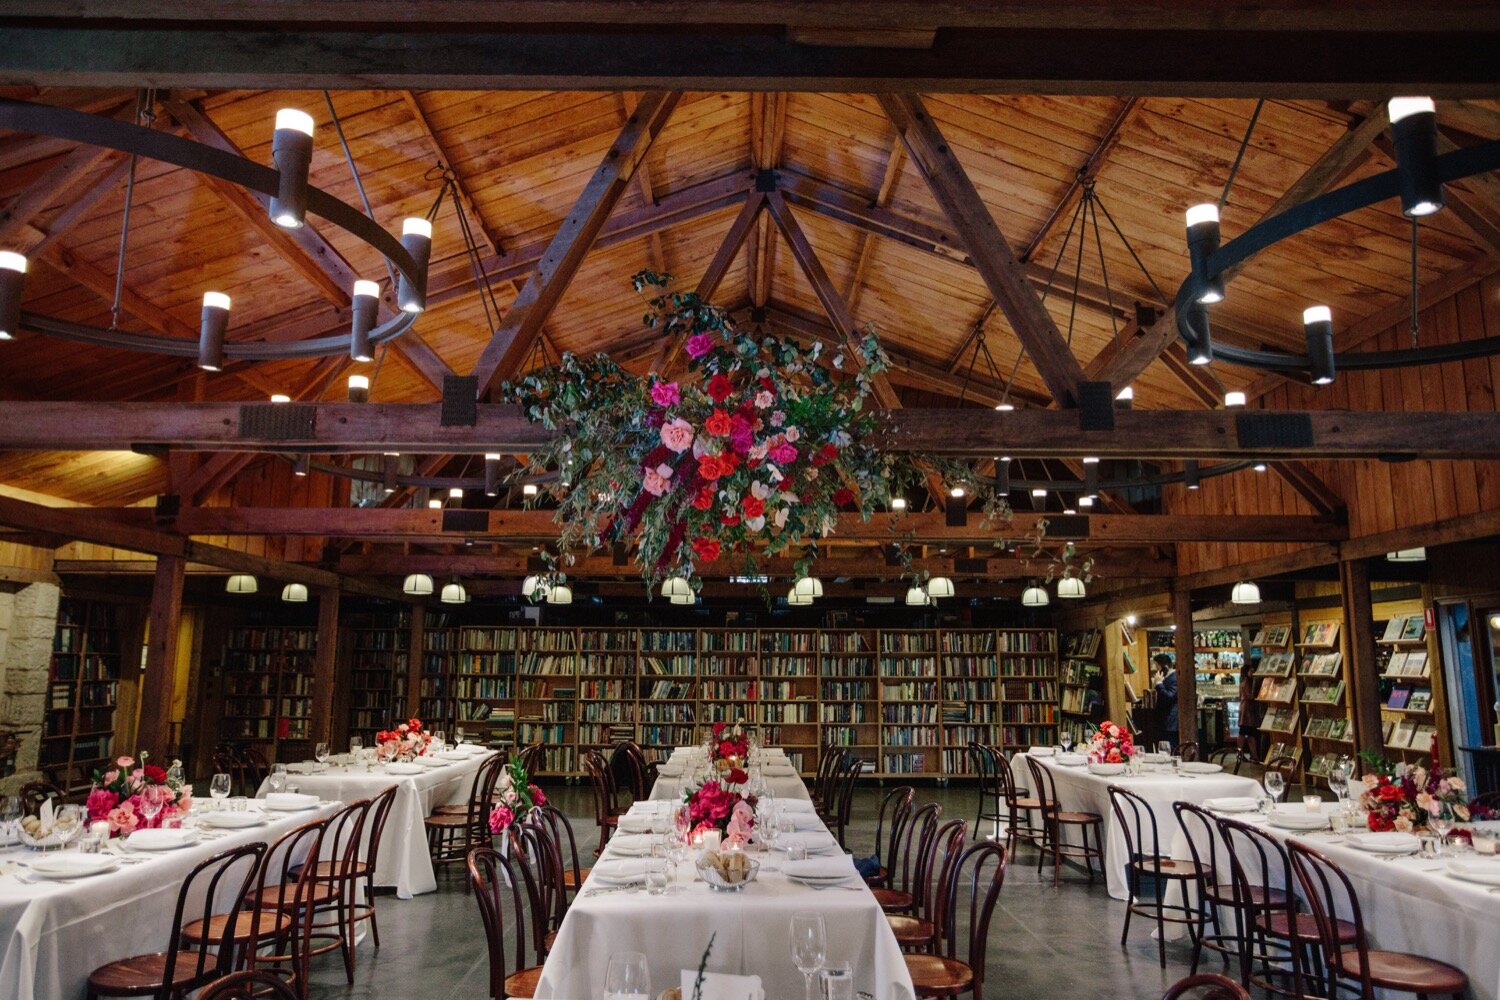 Floral installation ceiling bendooley book barn lime tree bower